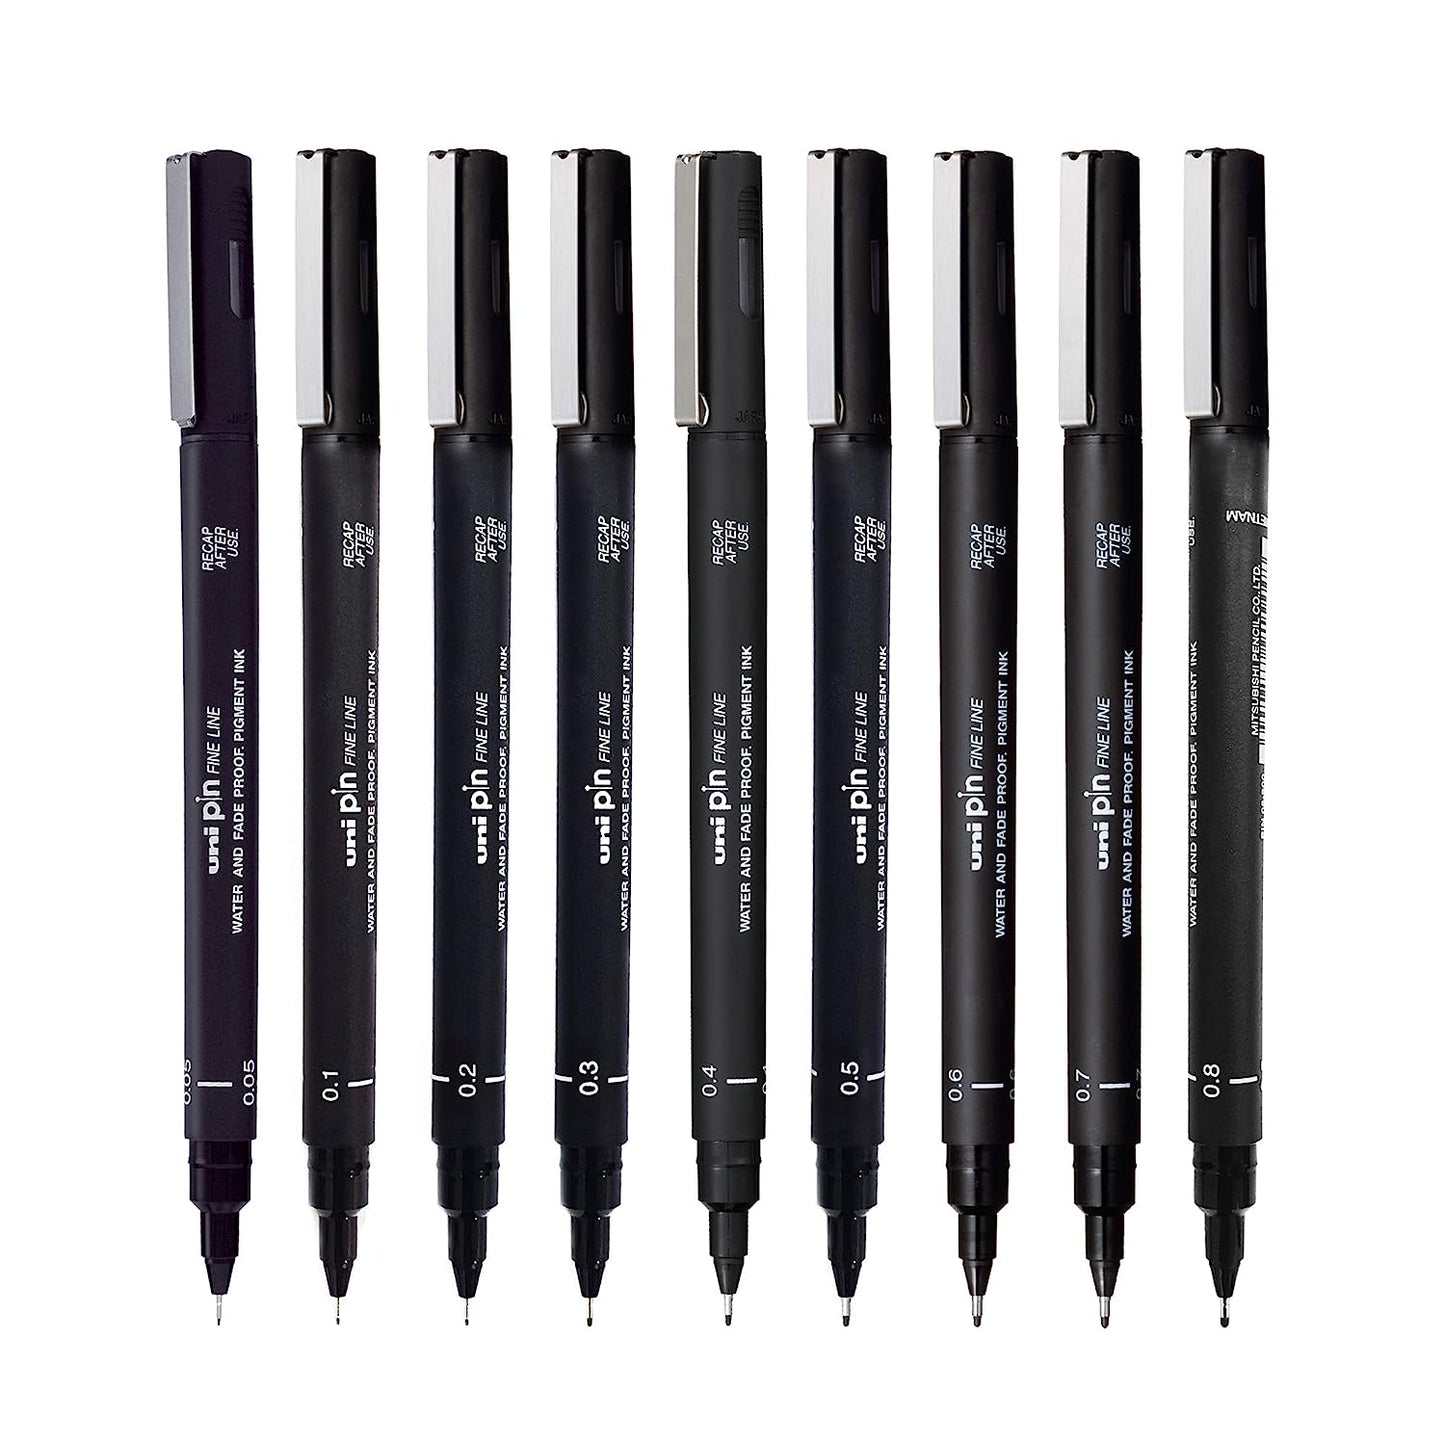 UNI-BALL PIN Drawing Pen Ultra Fine Line Marker 0.1mm Black Ink pack of 3 